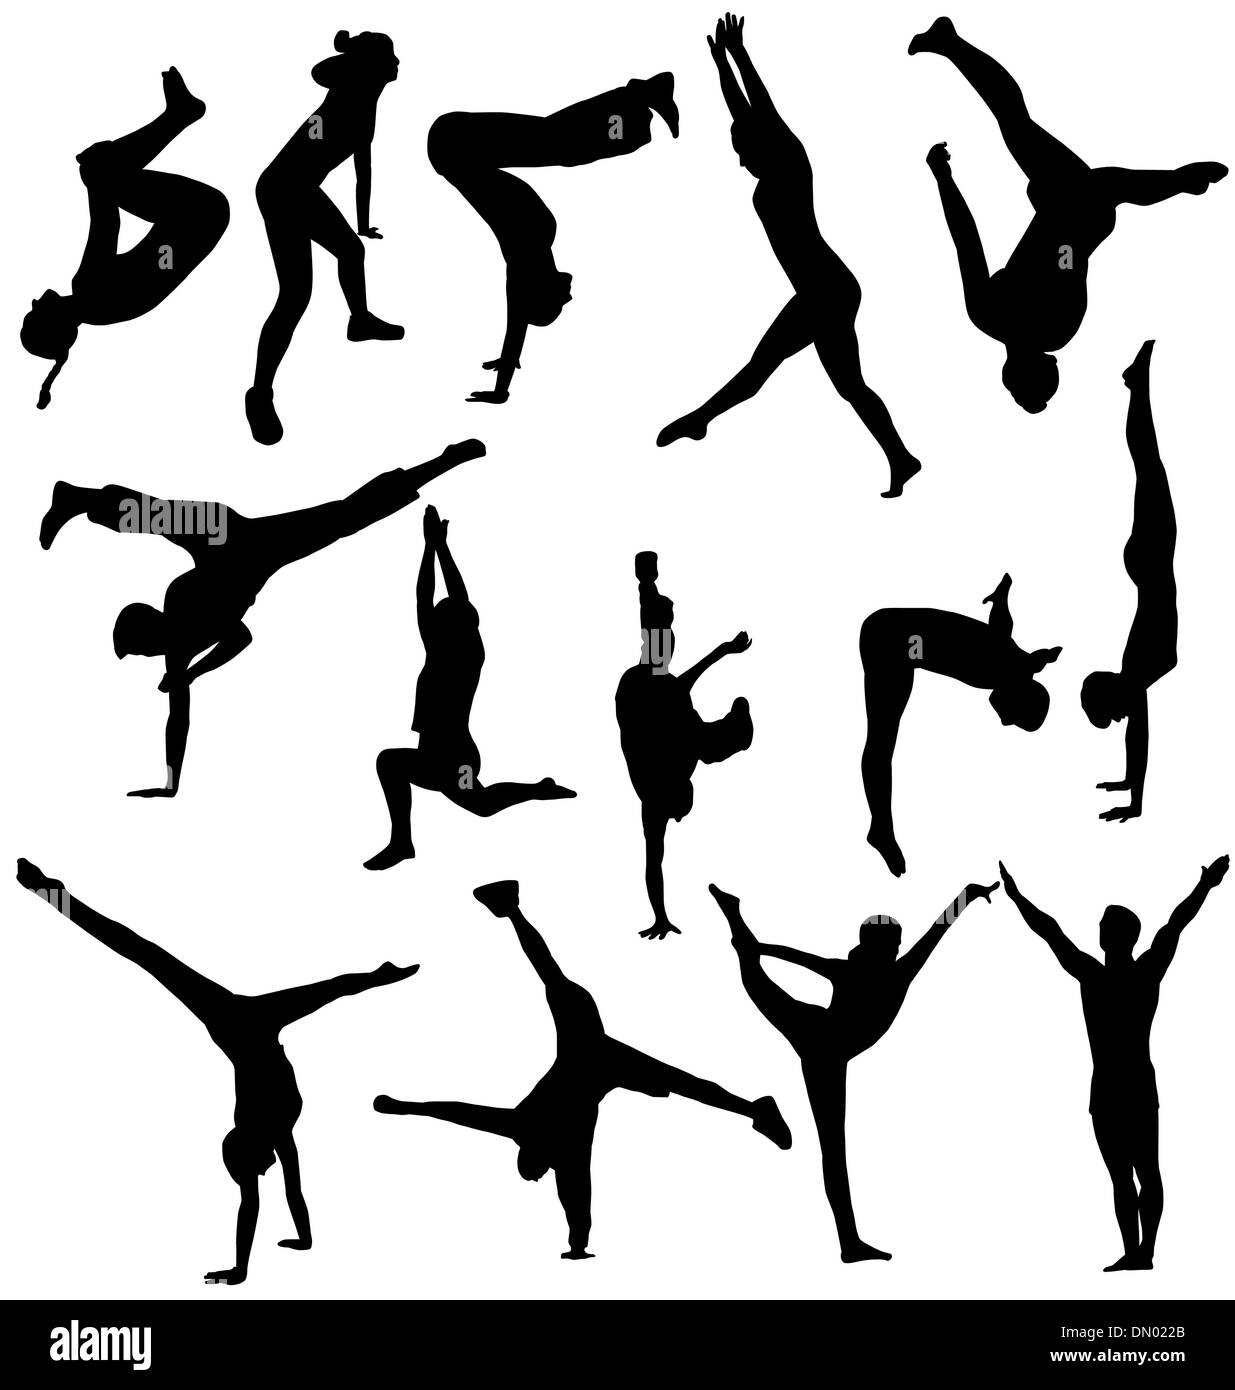 gymnastic silhouettes collection Stock Vector